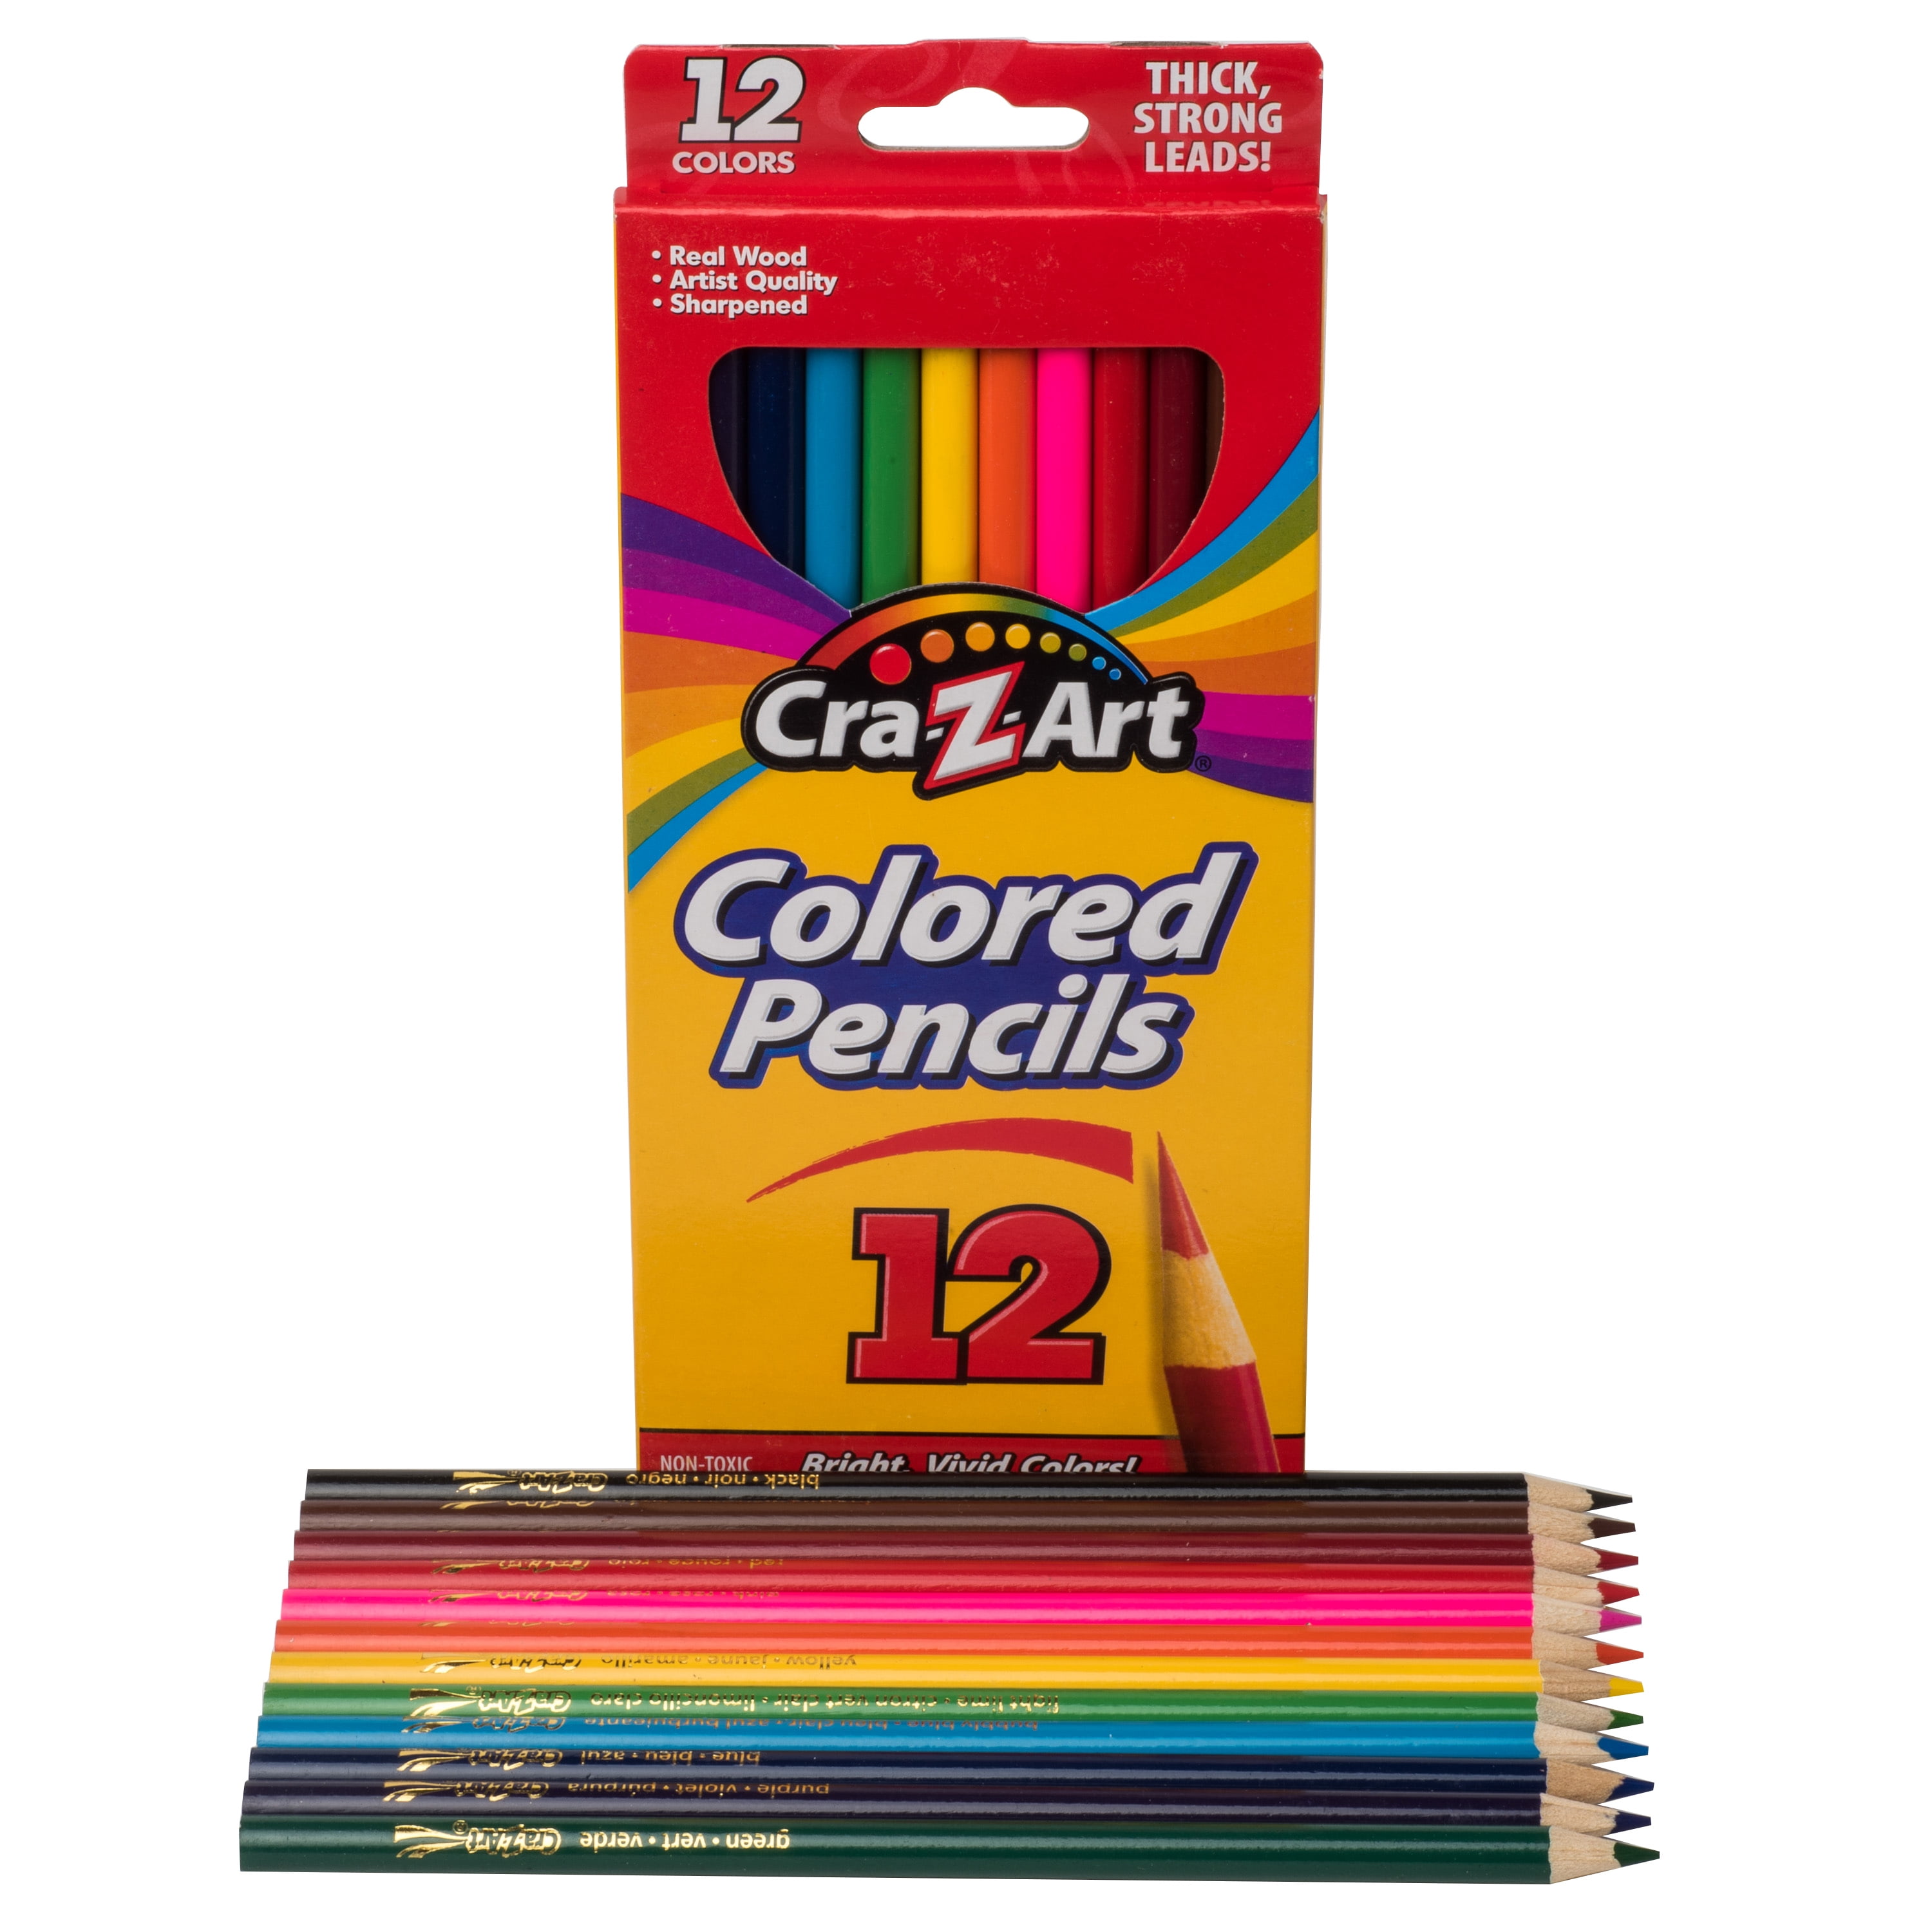 Cra-Z-art Colored Pencils 12 Count 2 pack